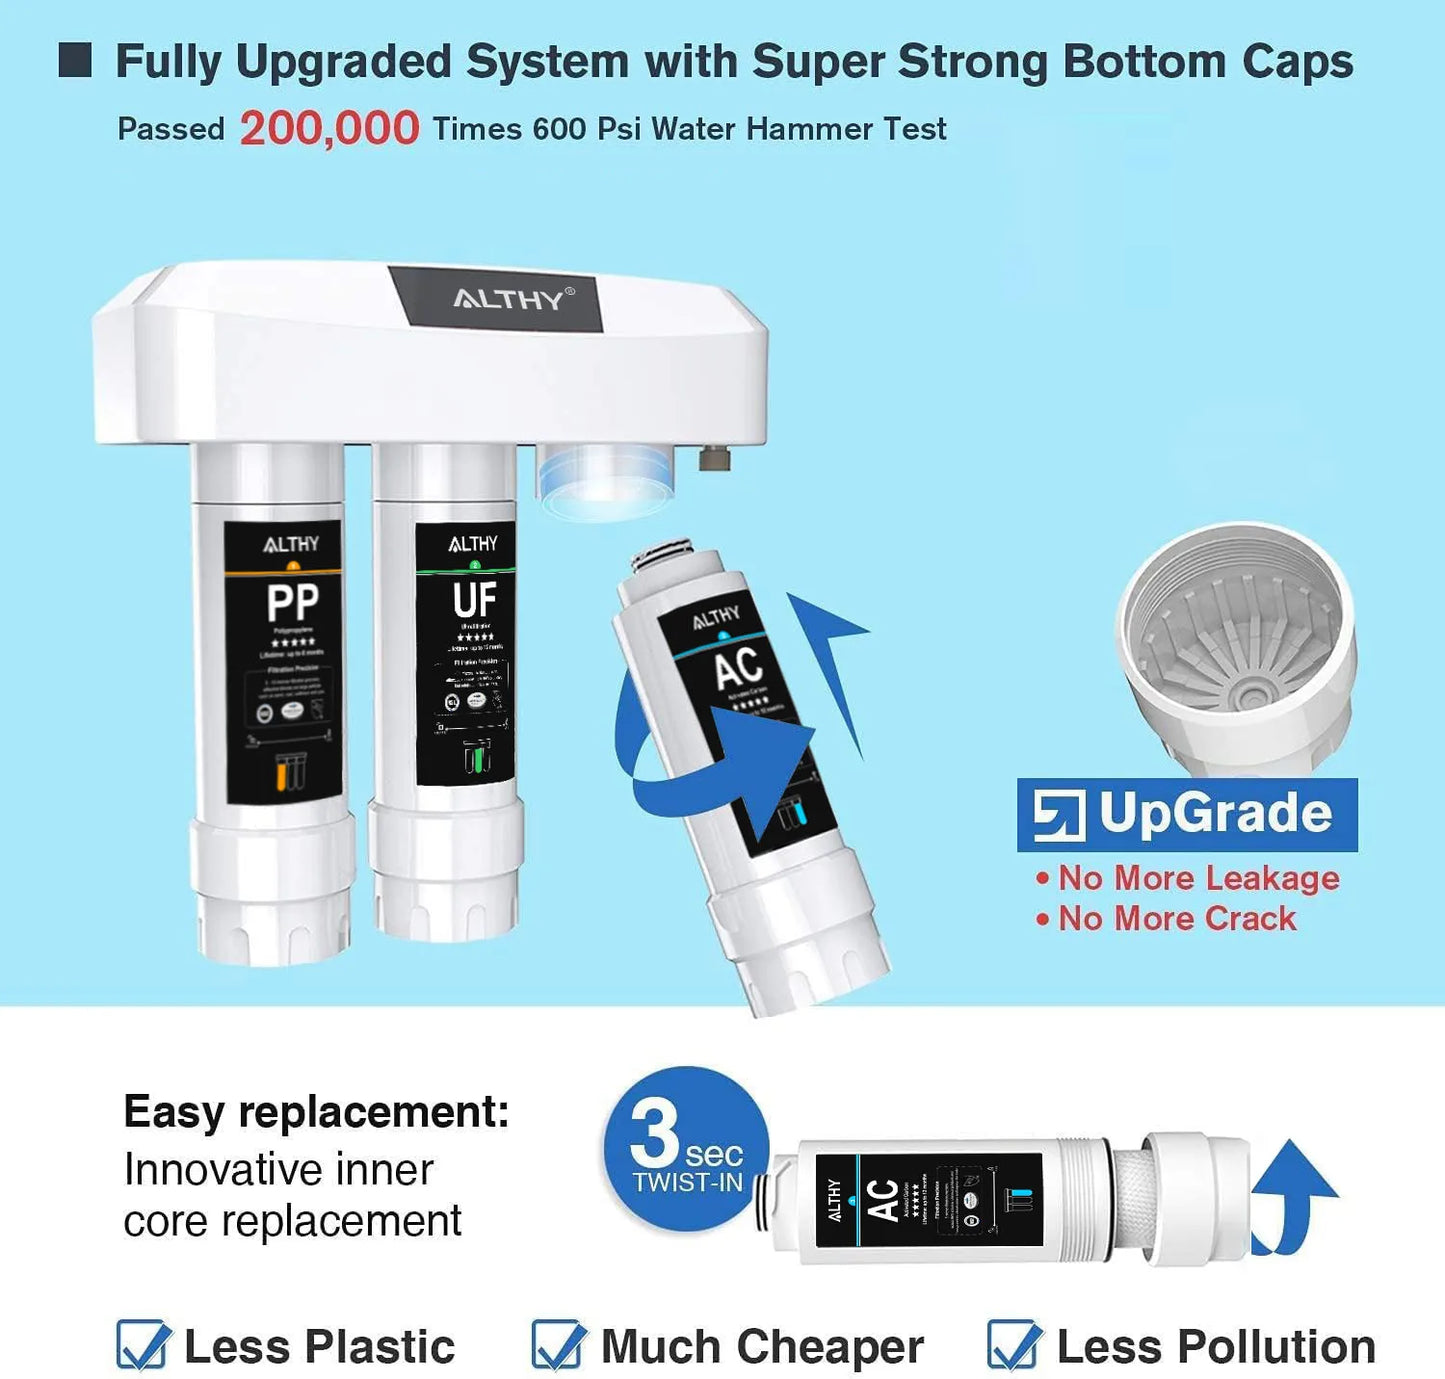 ALTHY Under Sink Ultrafiltration Water Filter Purifier System, 3 Stage PP+UF+AC,Remove Lead, Chlorine, Bacteria & Bad Taste